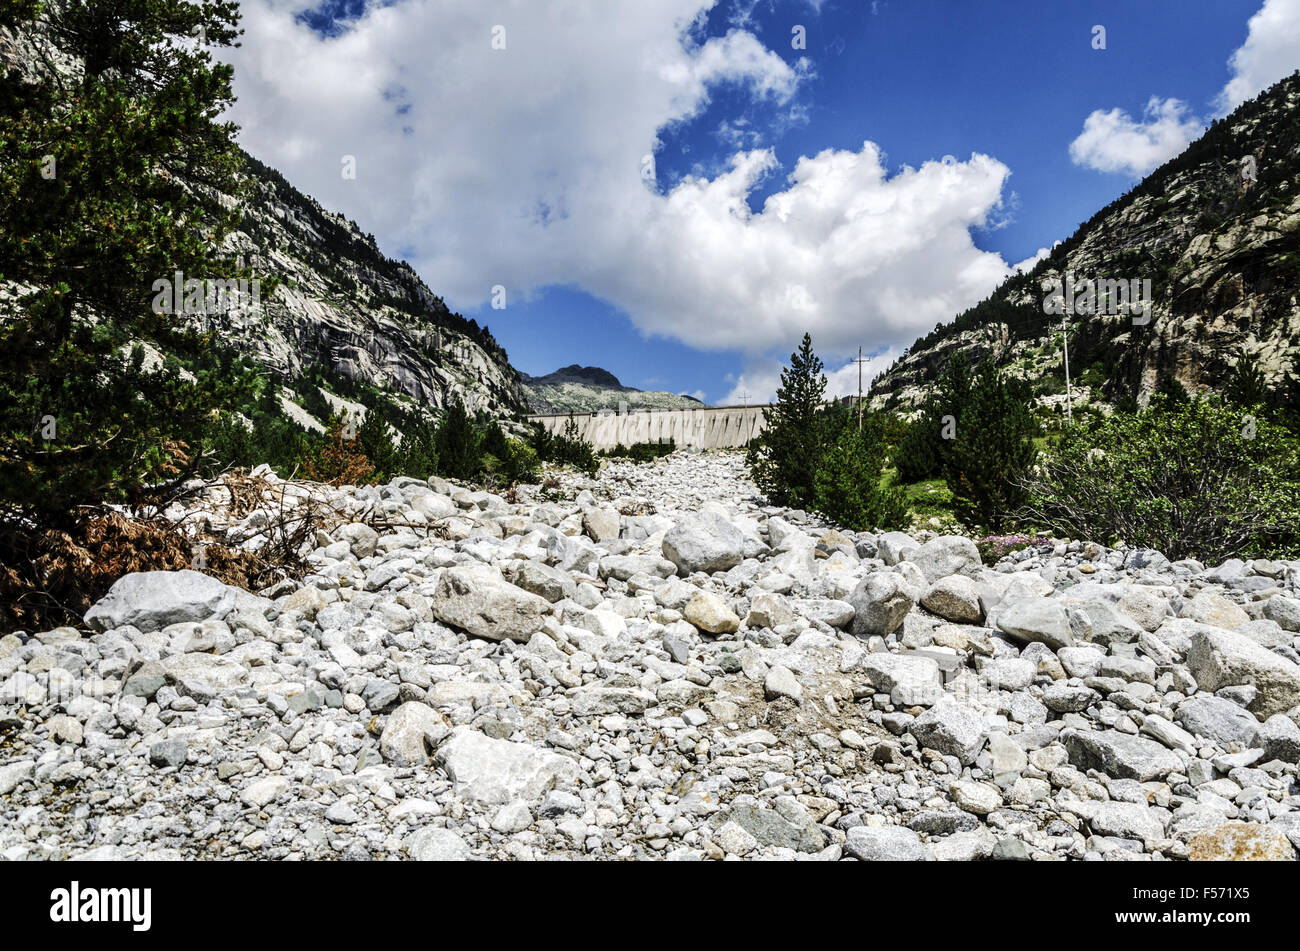 Dry out river in the Pyrenees mountains, thre is no even a drop of water. Stock Photo